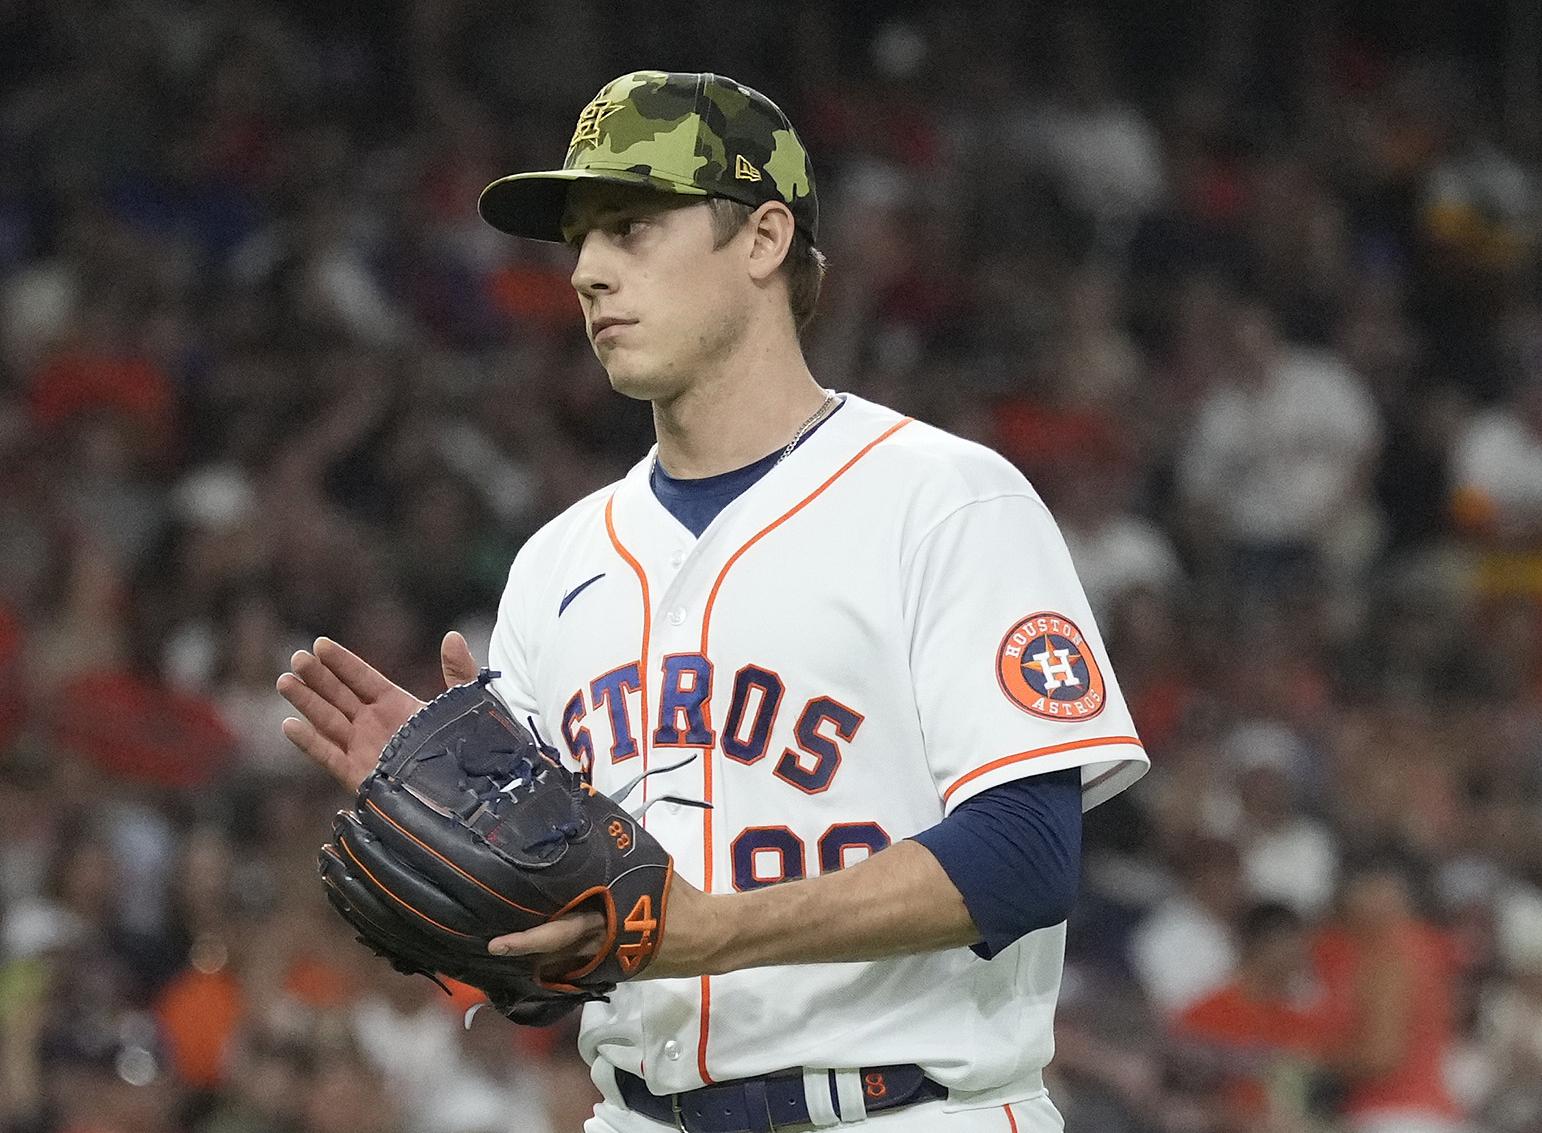 Phil Maton gave up a hit to brother Nick Maton in Astros' win